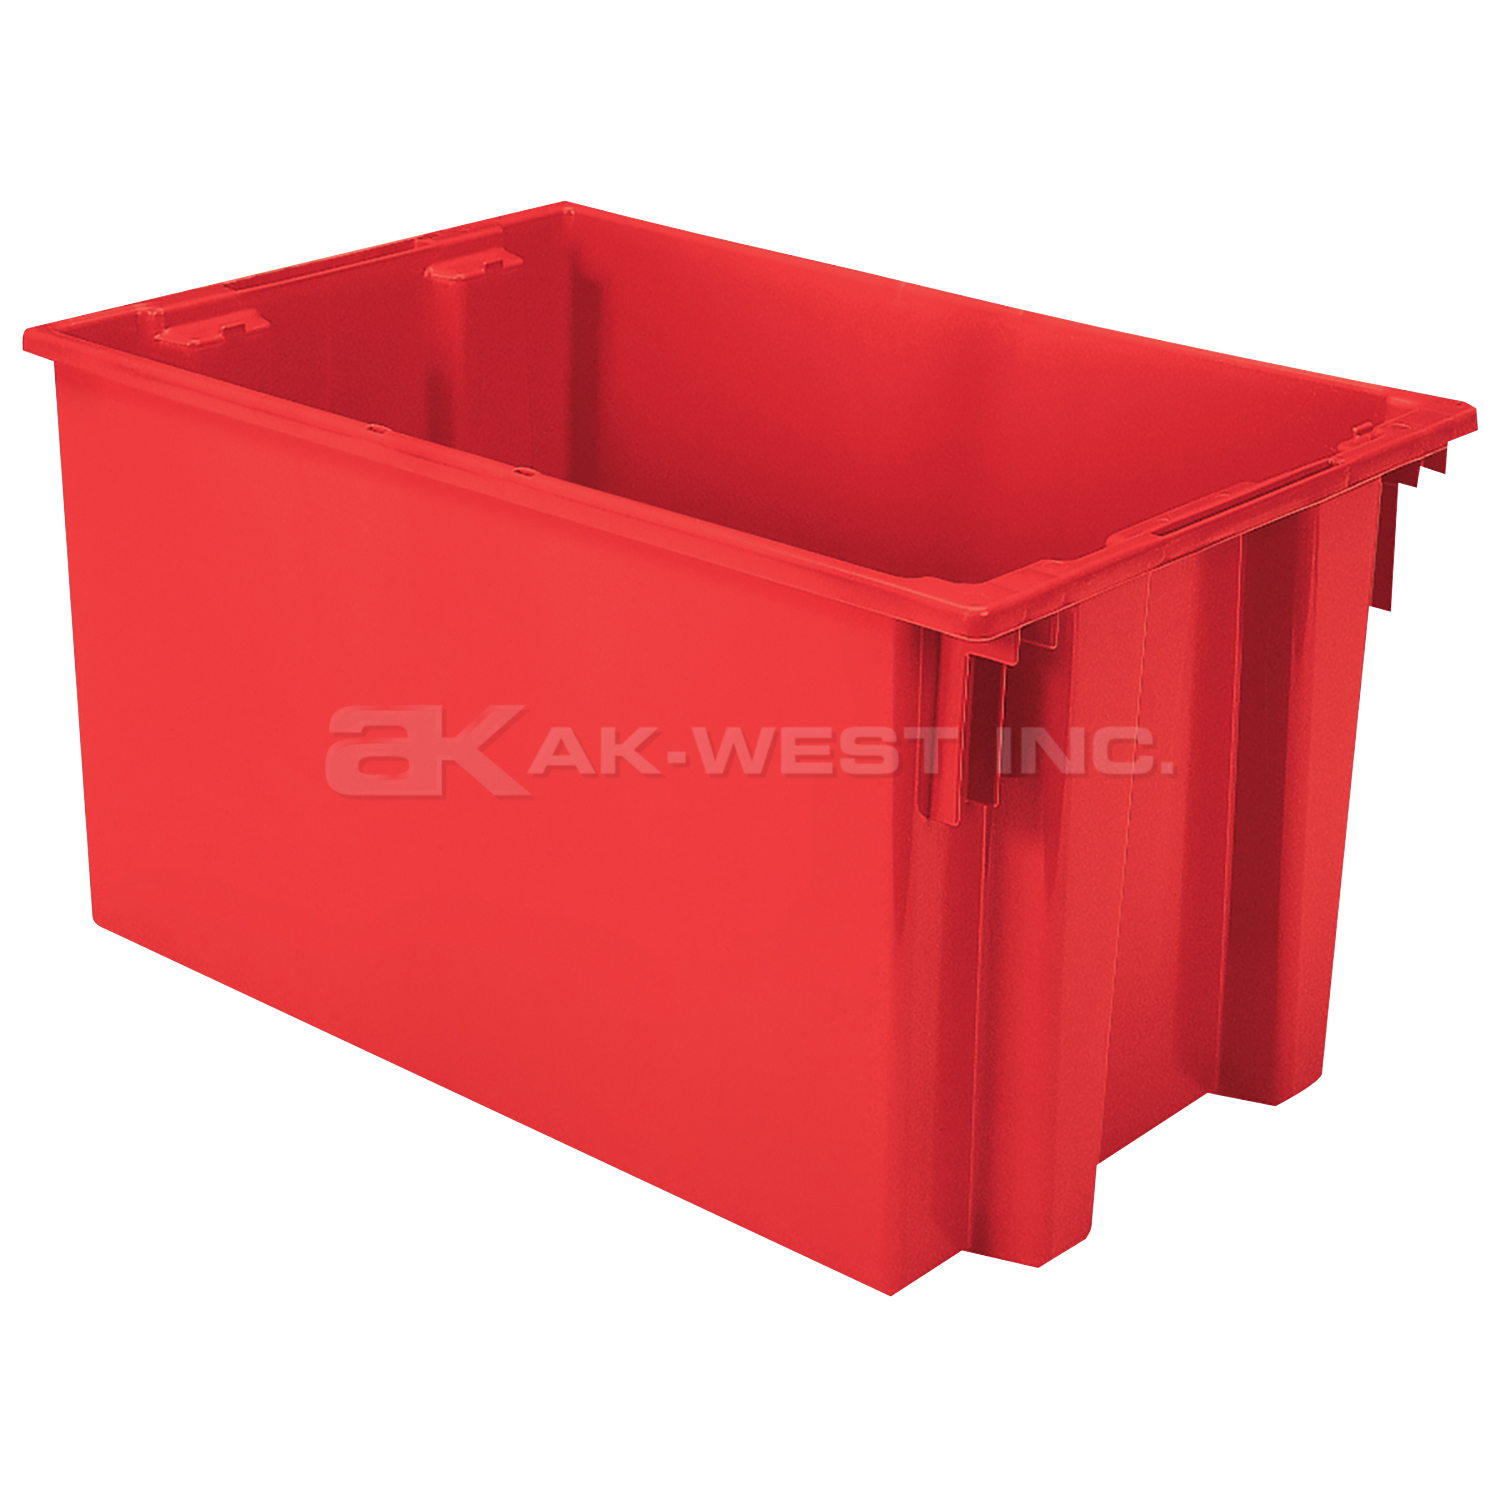 Red, 29-1/2" x 19-1/2" x 15" Nest and Stack Tote (3 Per Carton)